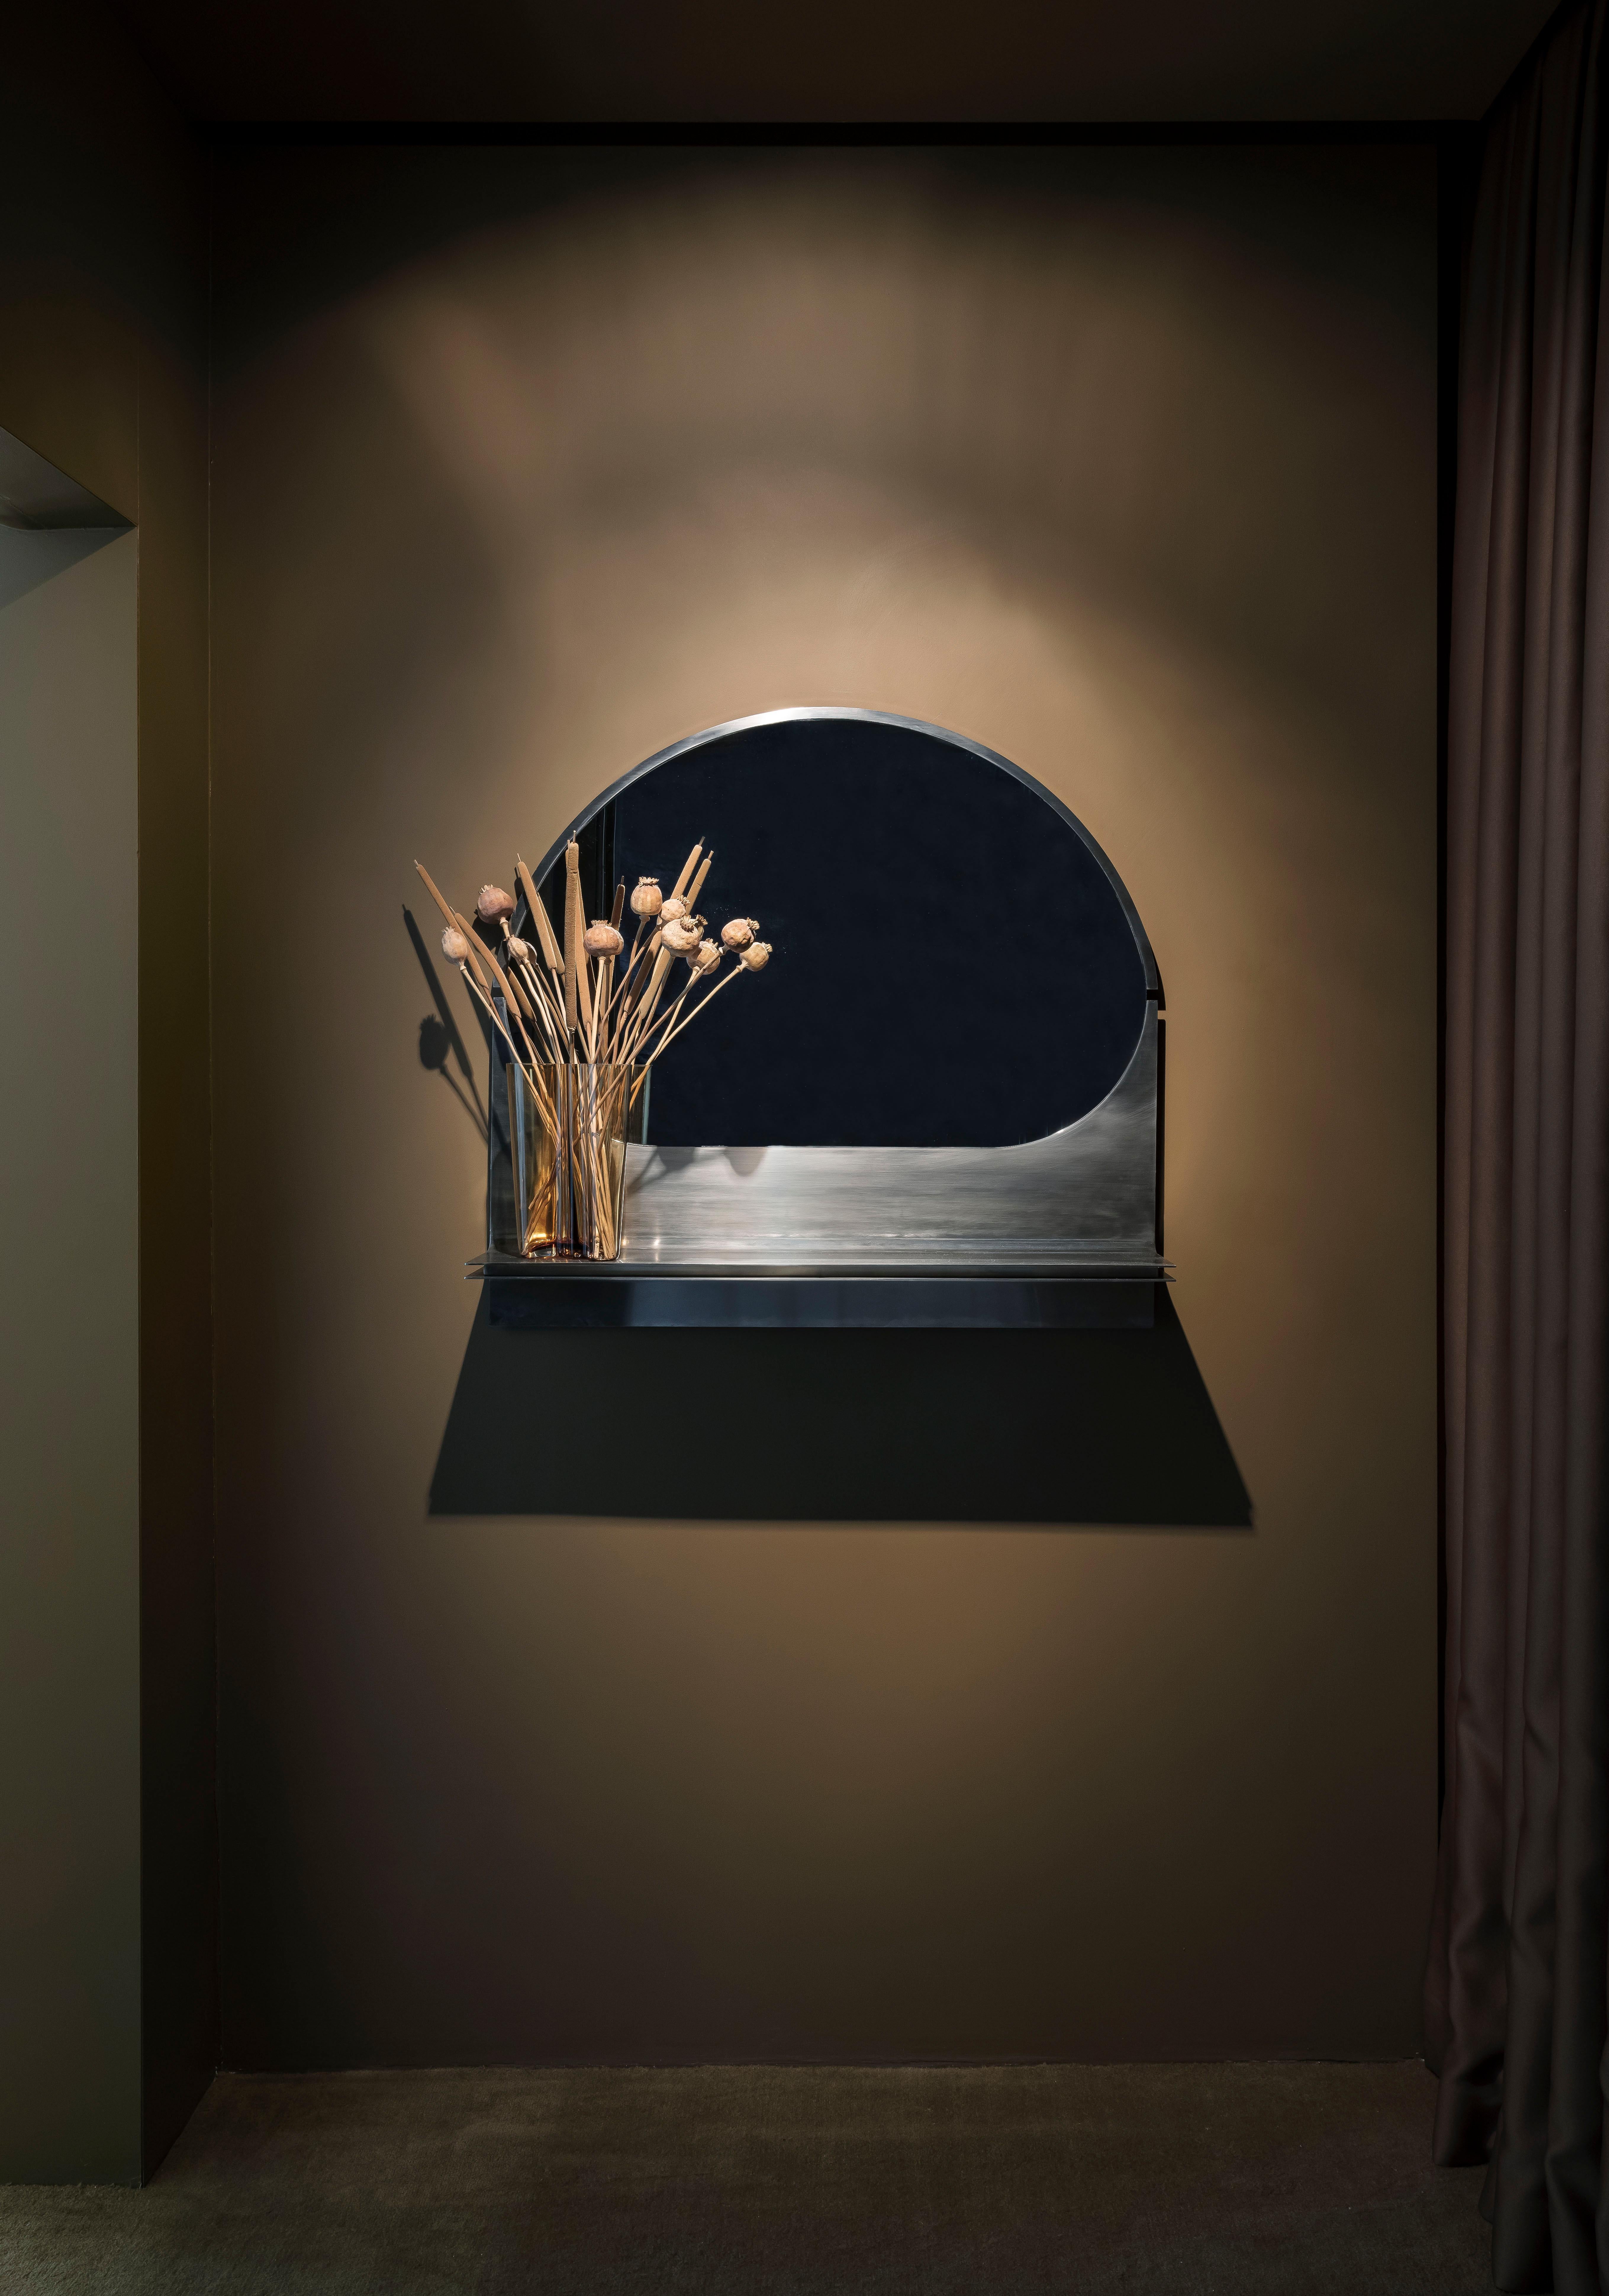 Bend mirror with shelf by Buket Hoscan Bazman
2019
Dimensions: W 90, D 17, H 85 cm
Material: Stainless steel and mirror

Buket Hoscan Bazman was born in Izmir, Turkey, in 1989. Graduated at the Isik University and after few years of working in